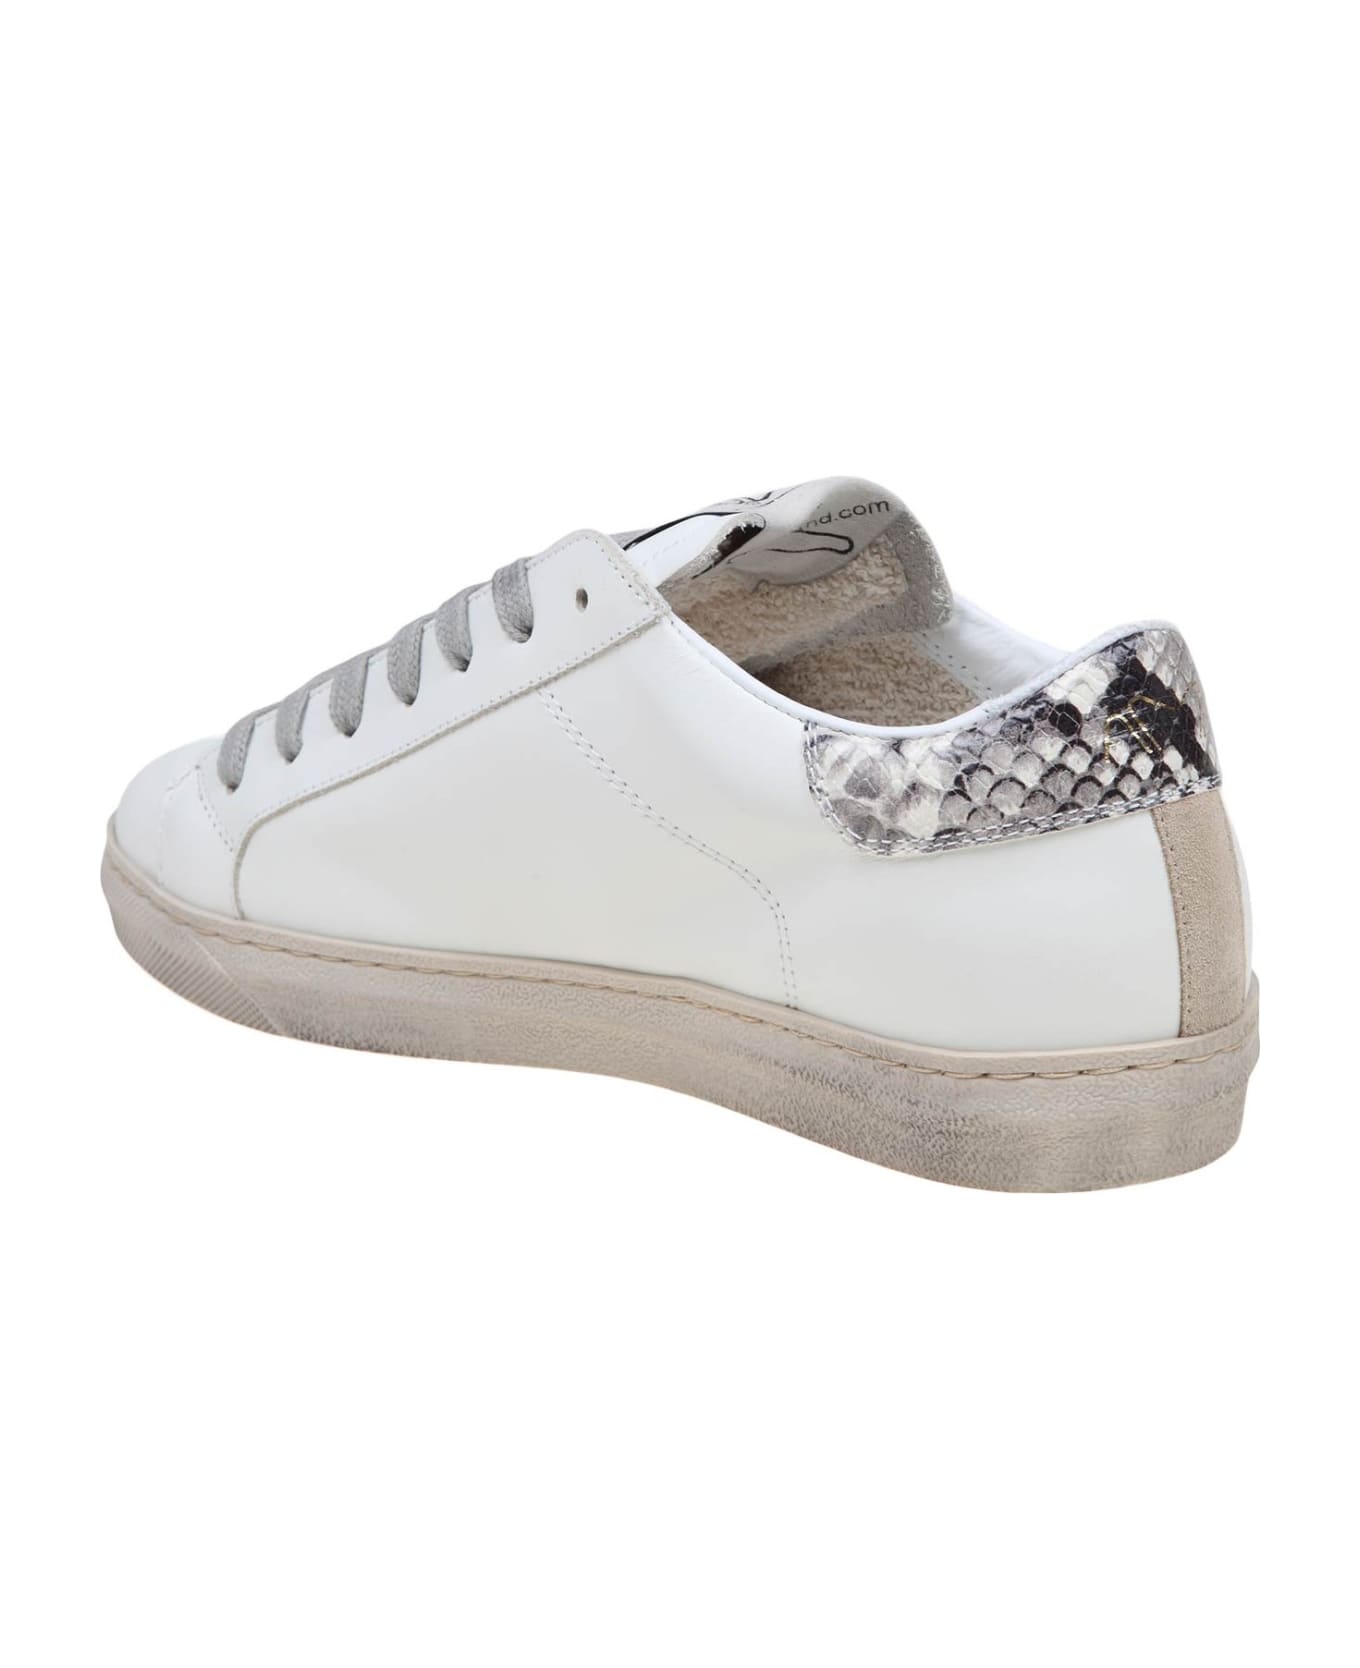 AMA-BRAND Sneakers In White Leather And Gold Glitter - BIANCO/GLITTER